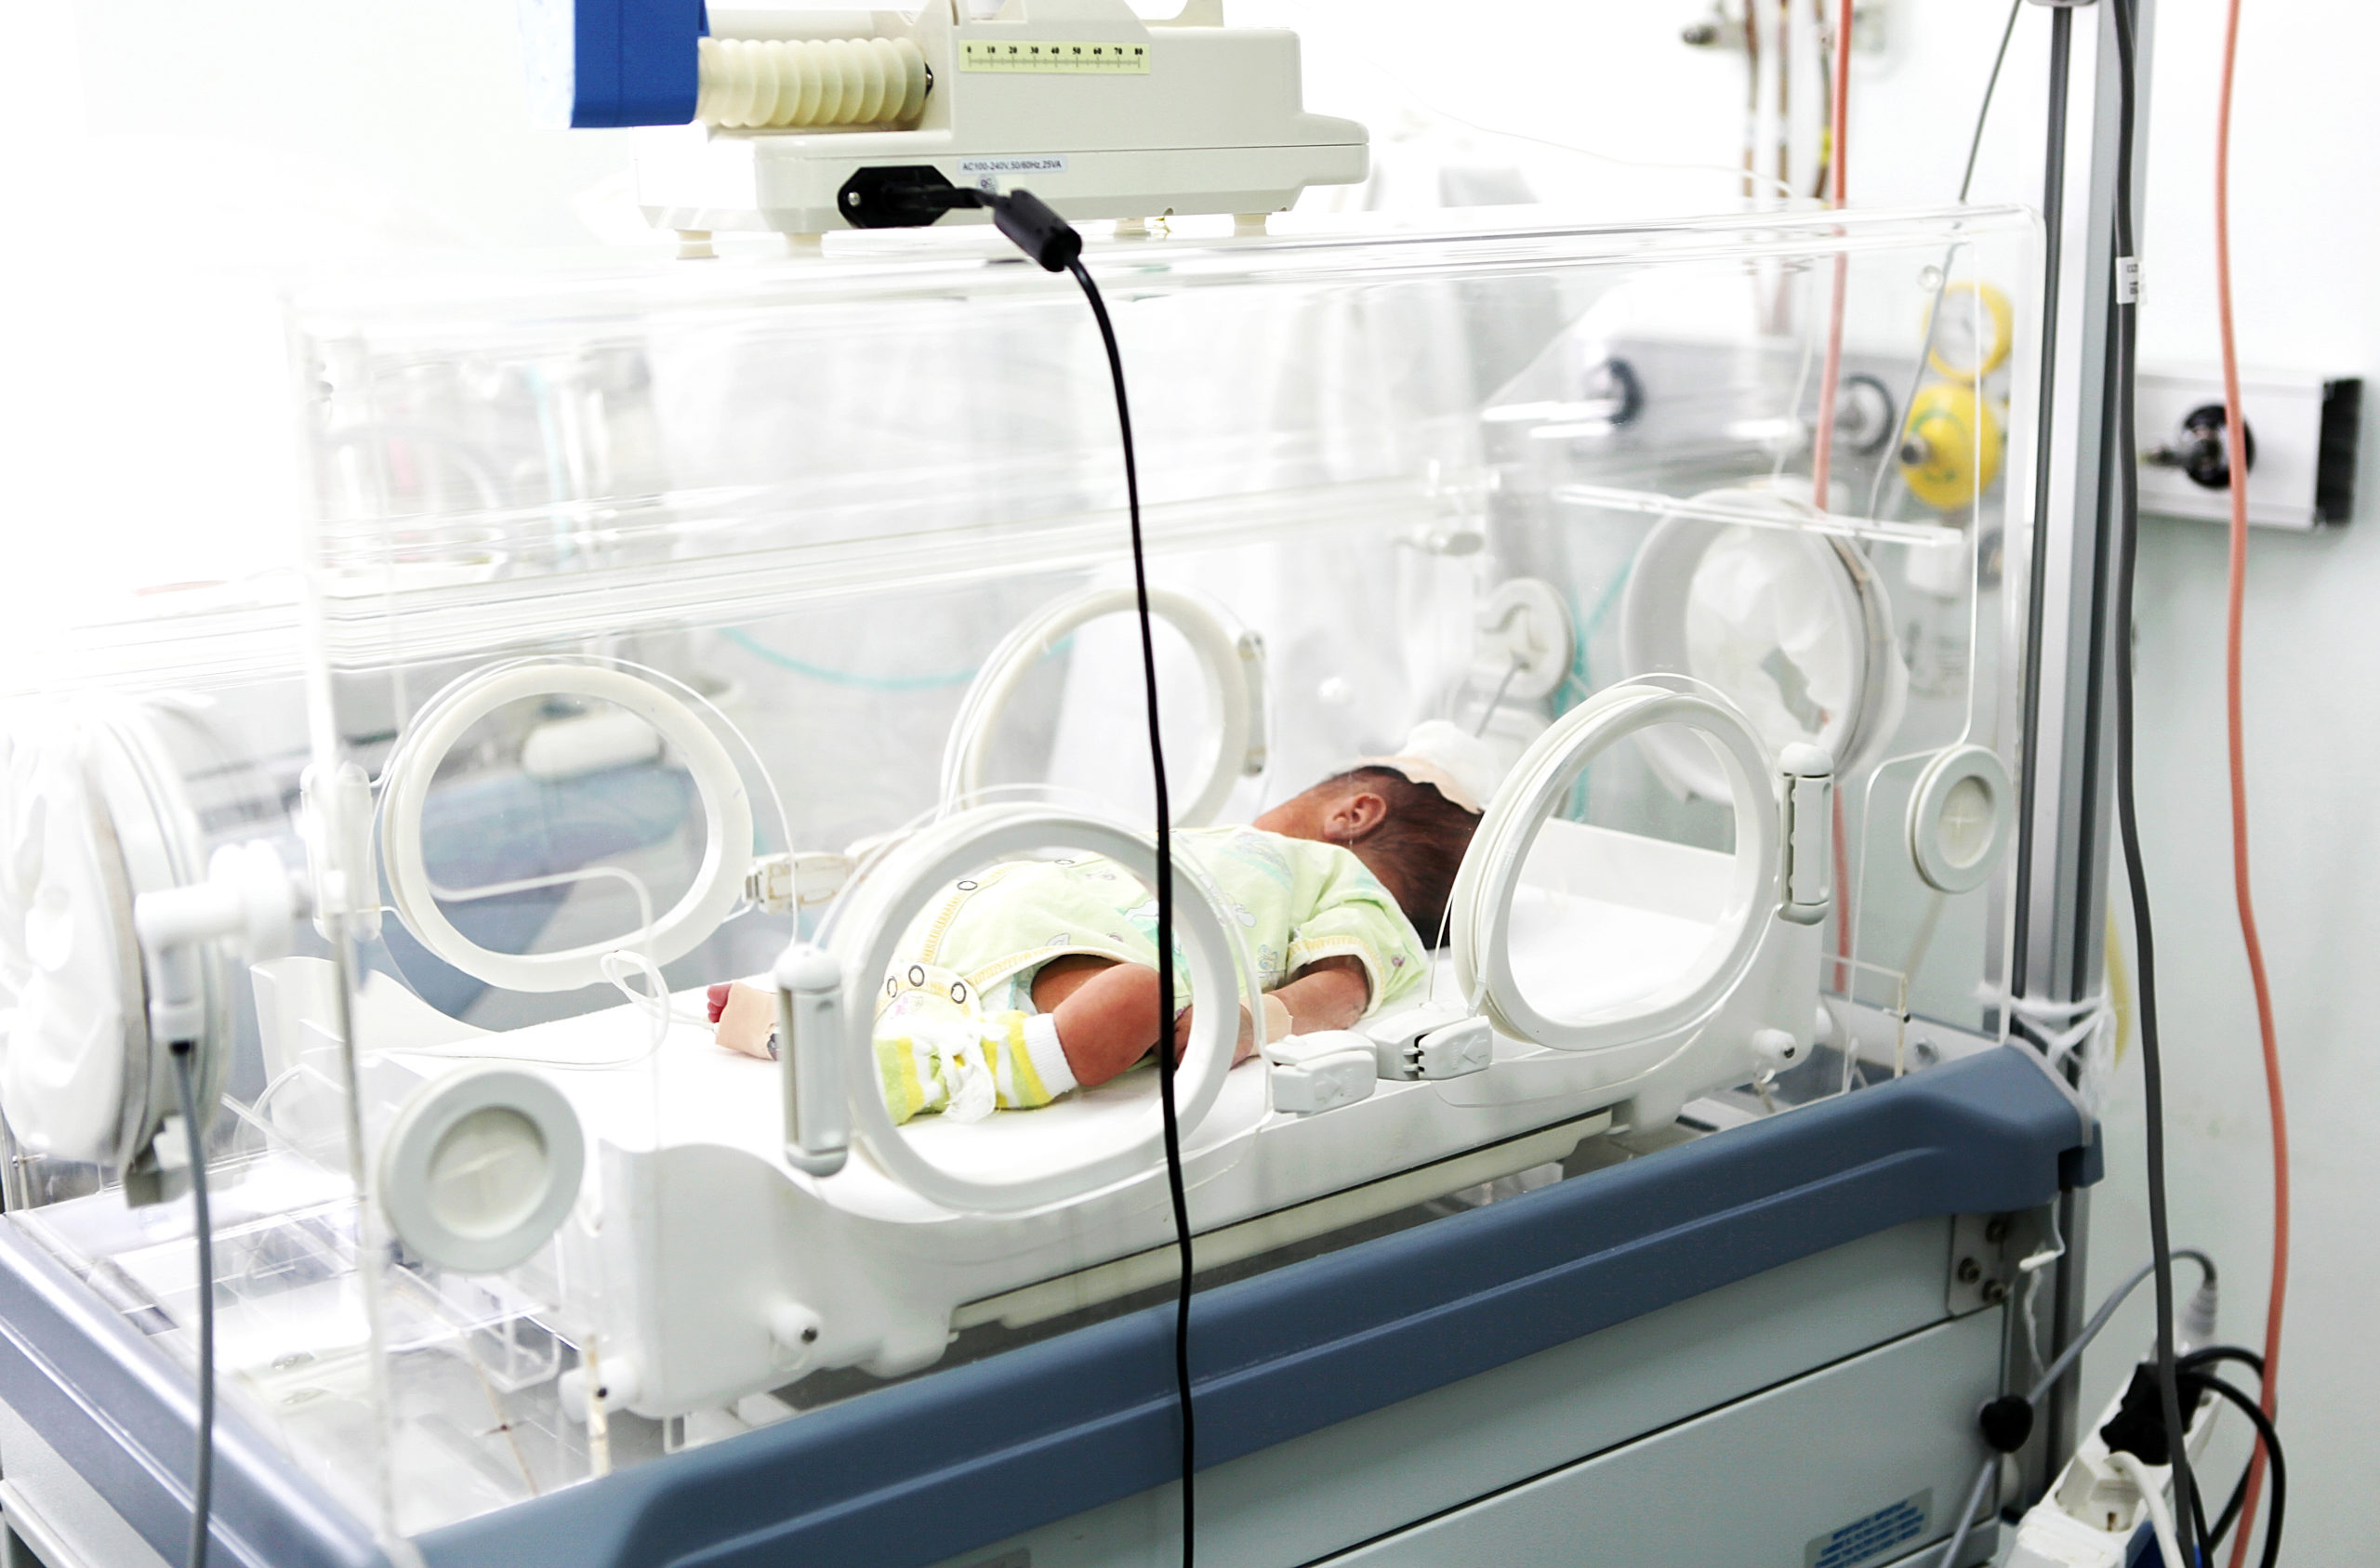 The Global Neonatal Care Equipment Market Market size is expected to grow from USD 7.36 billion in 2023 to USD 10.12 billion by 2028, at a CAGR of 6.57% during the forecast period (2023-2028).